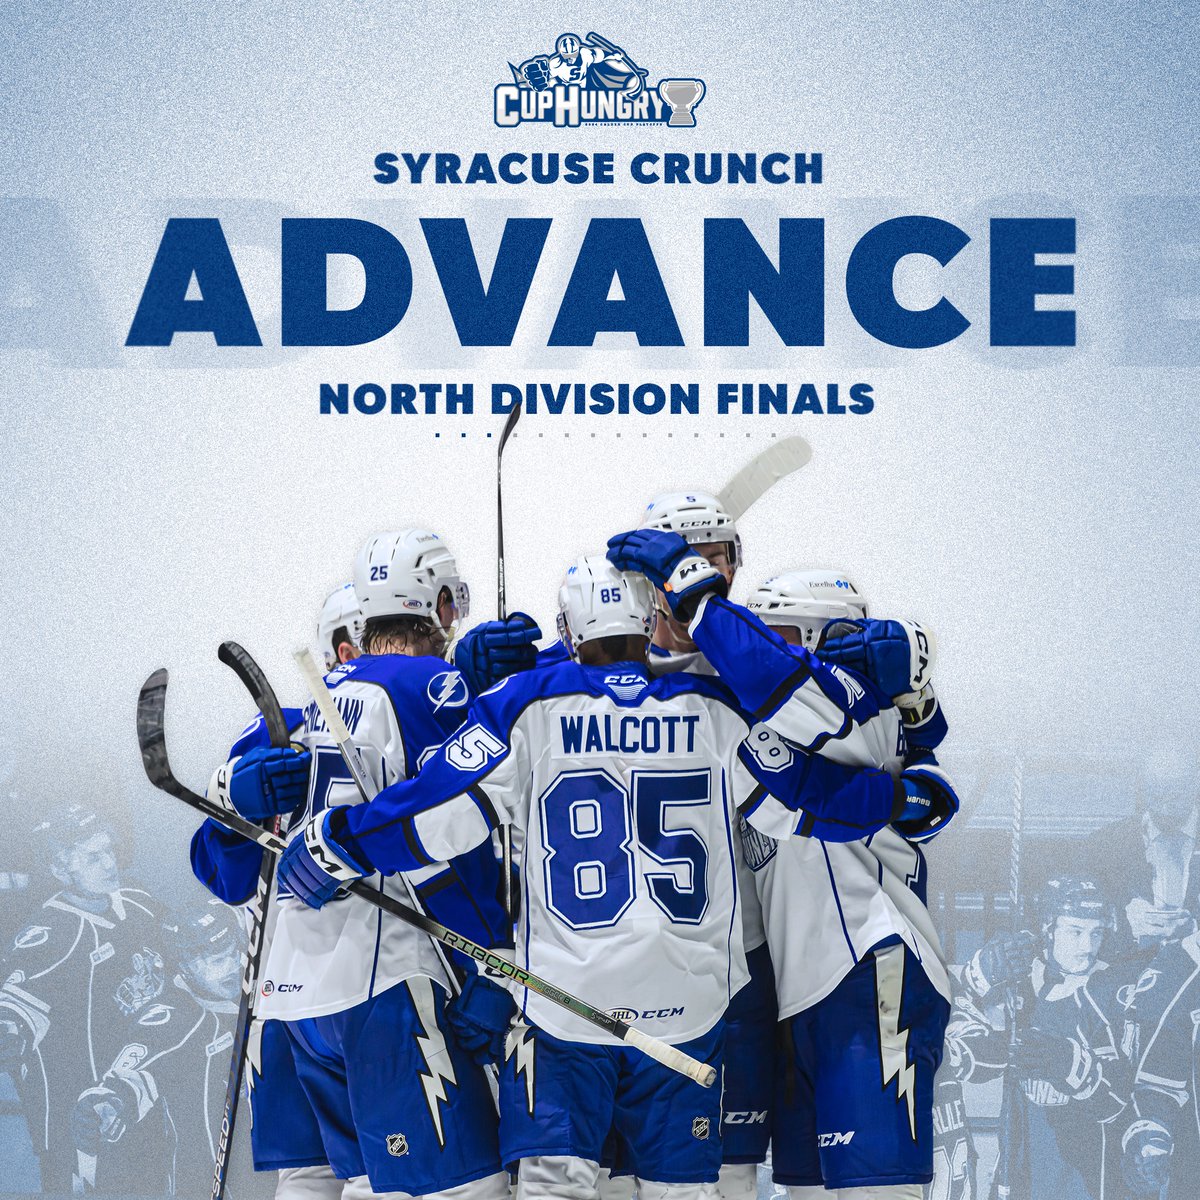 WE'RE MOVING ON TO THE NORTH DIVISION FINALS! #CupHungry